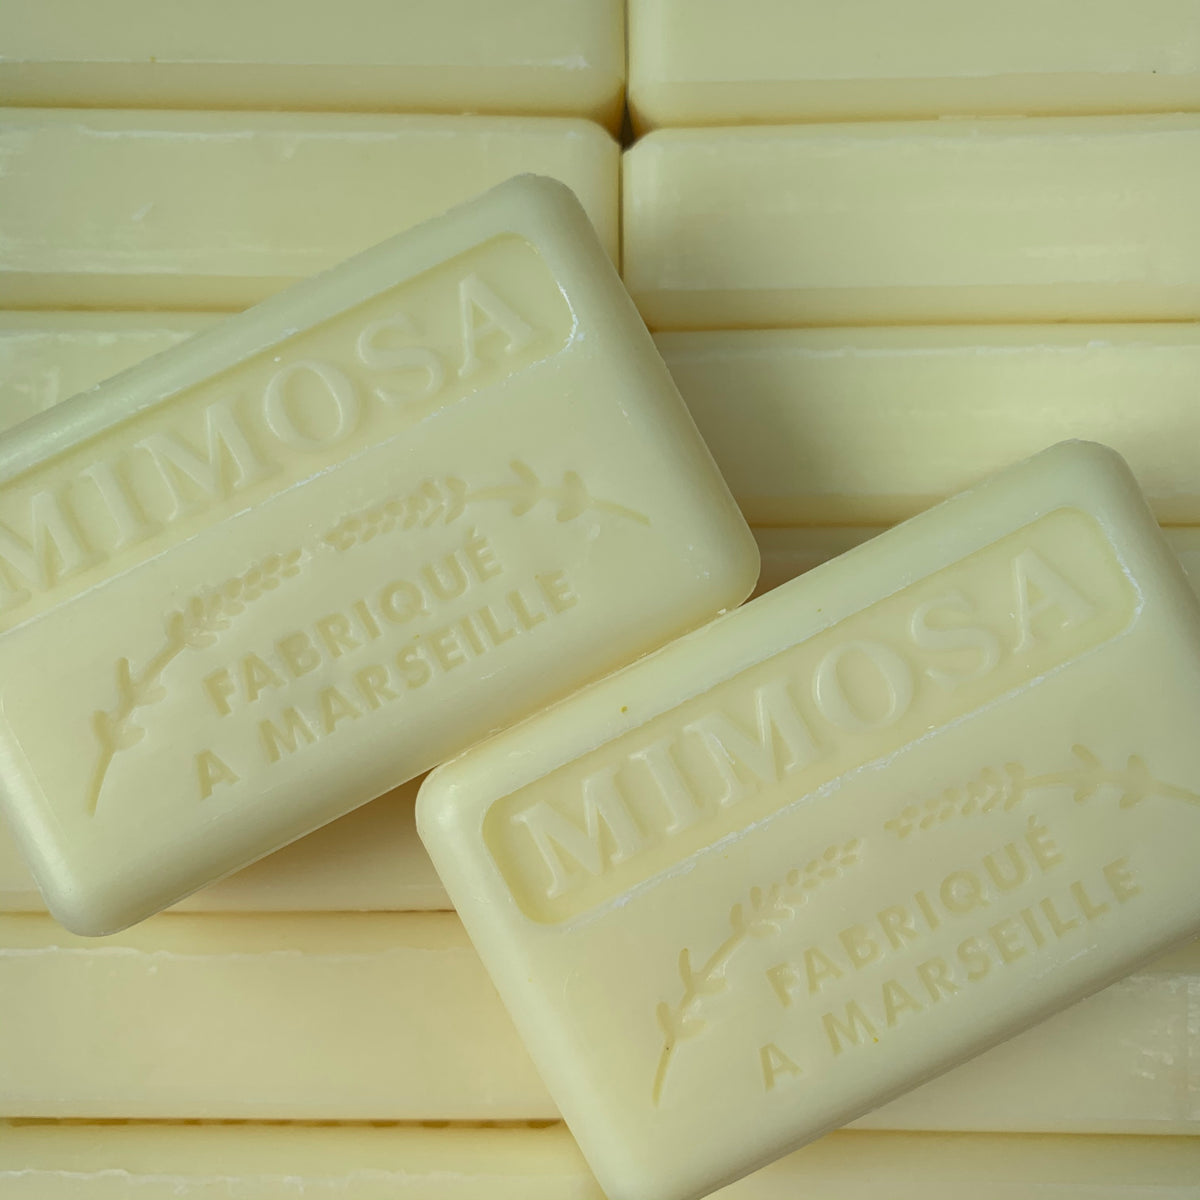 mimosa french soap marseille